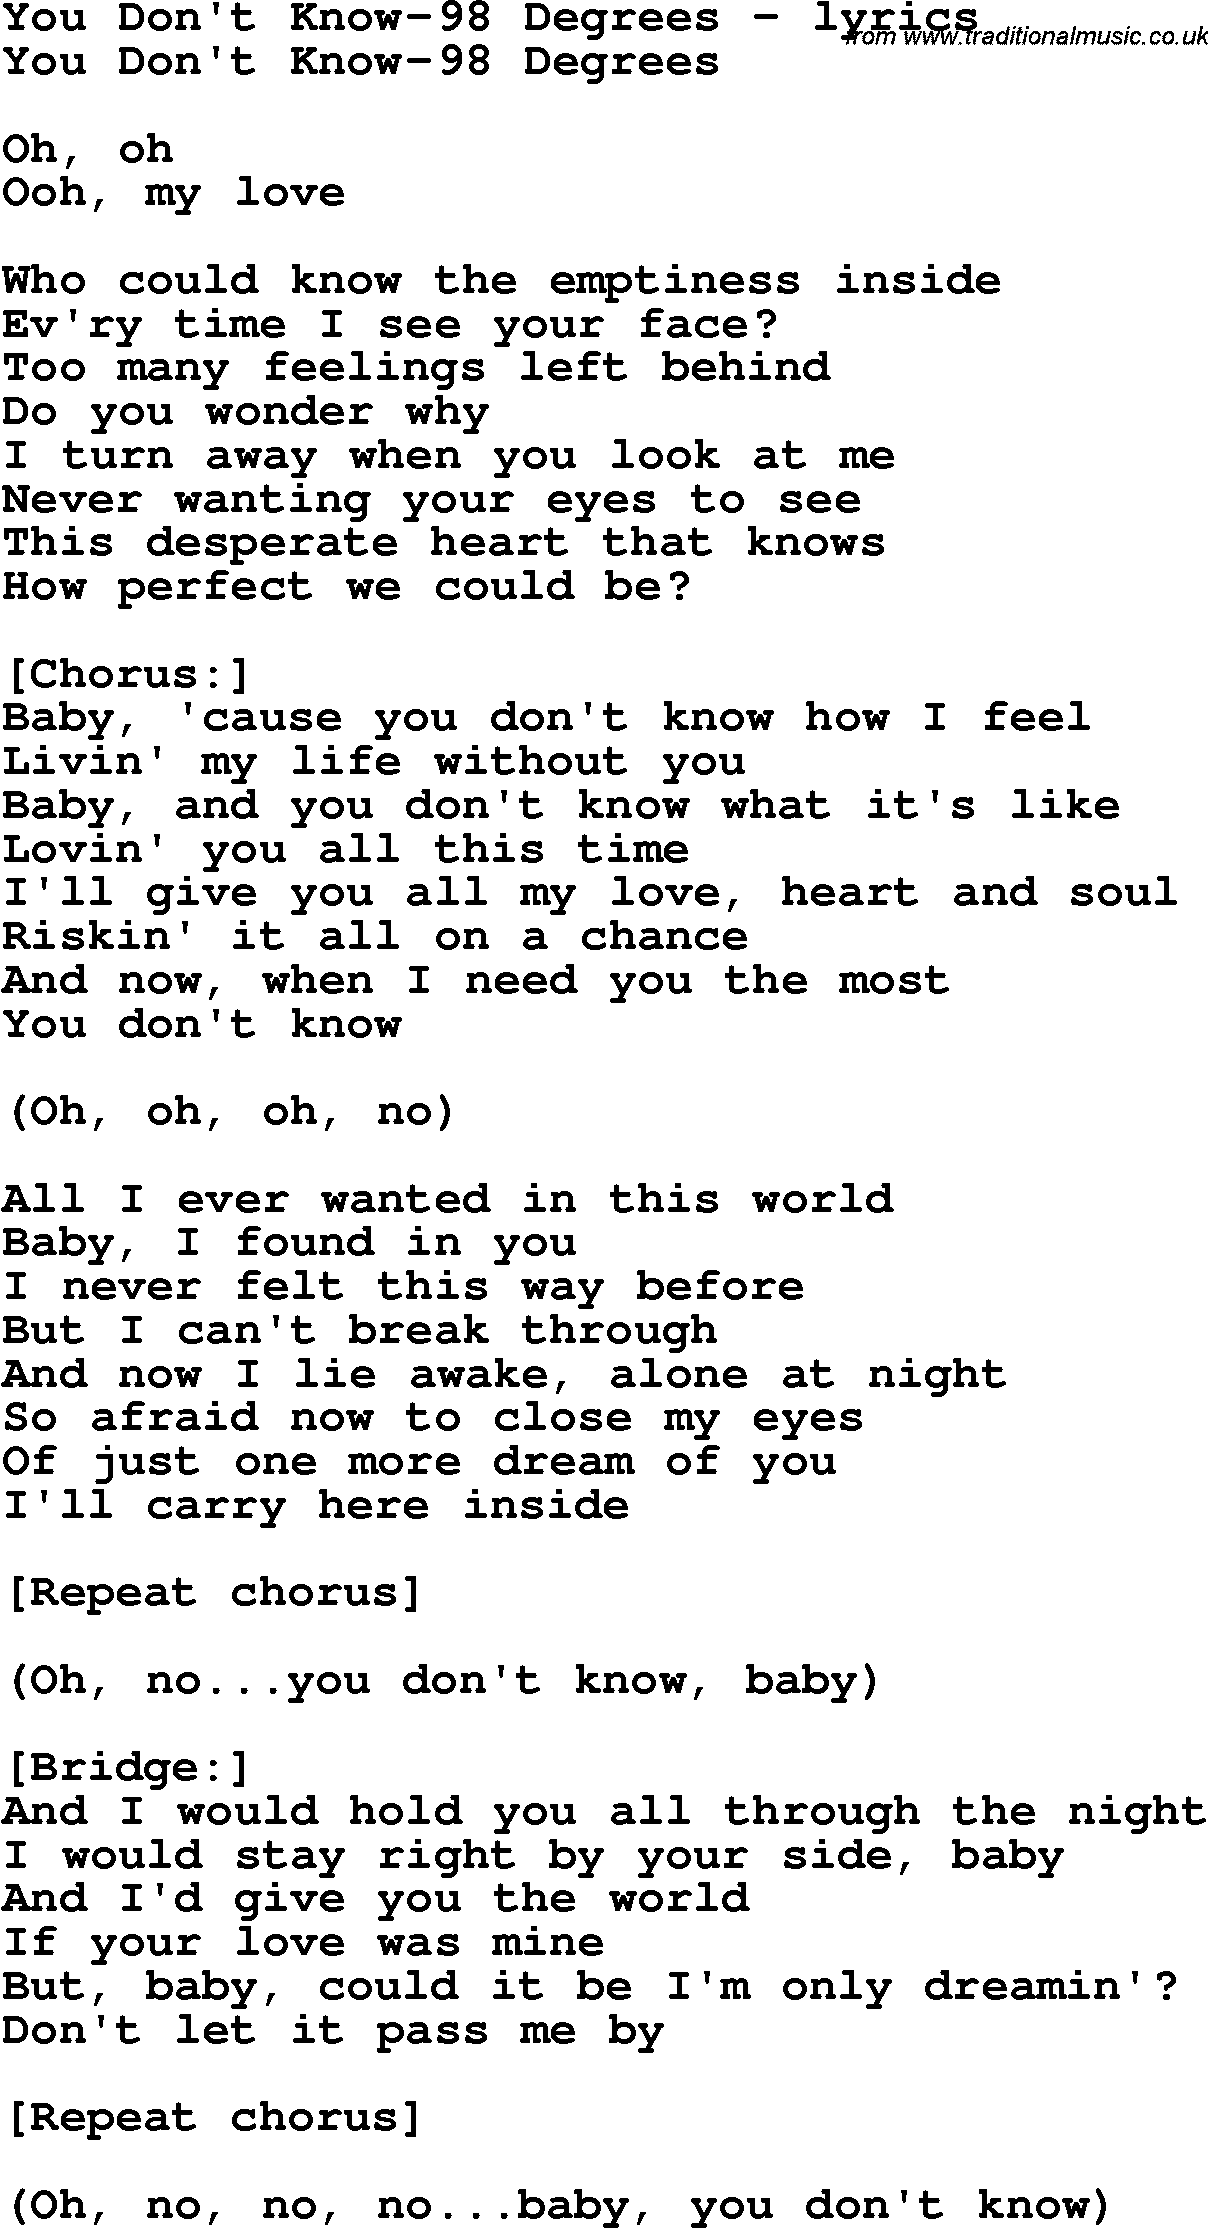 Love Song Lyrics for: You Don't Know-98 Degrees